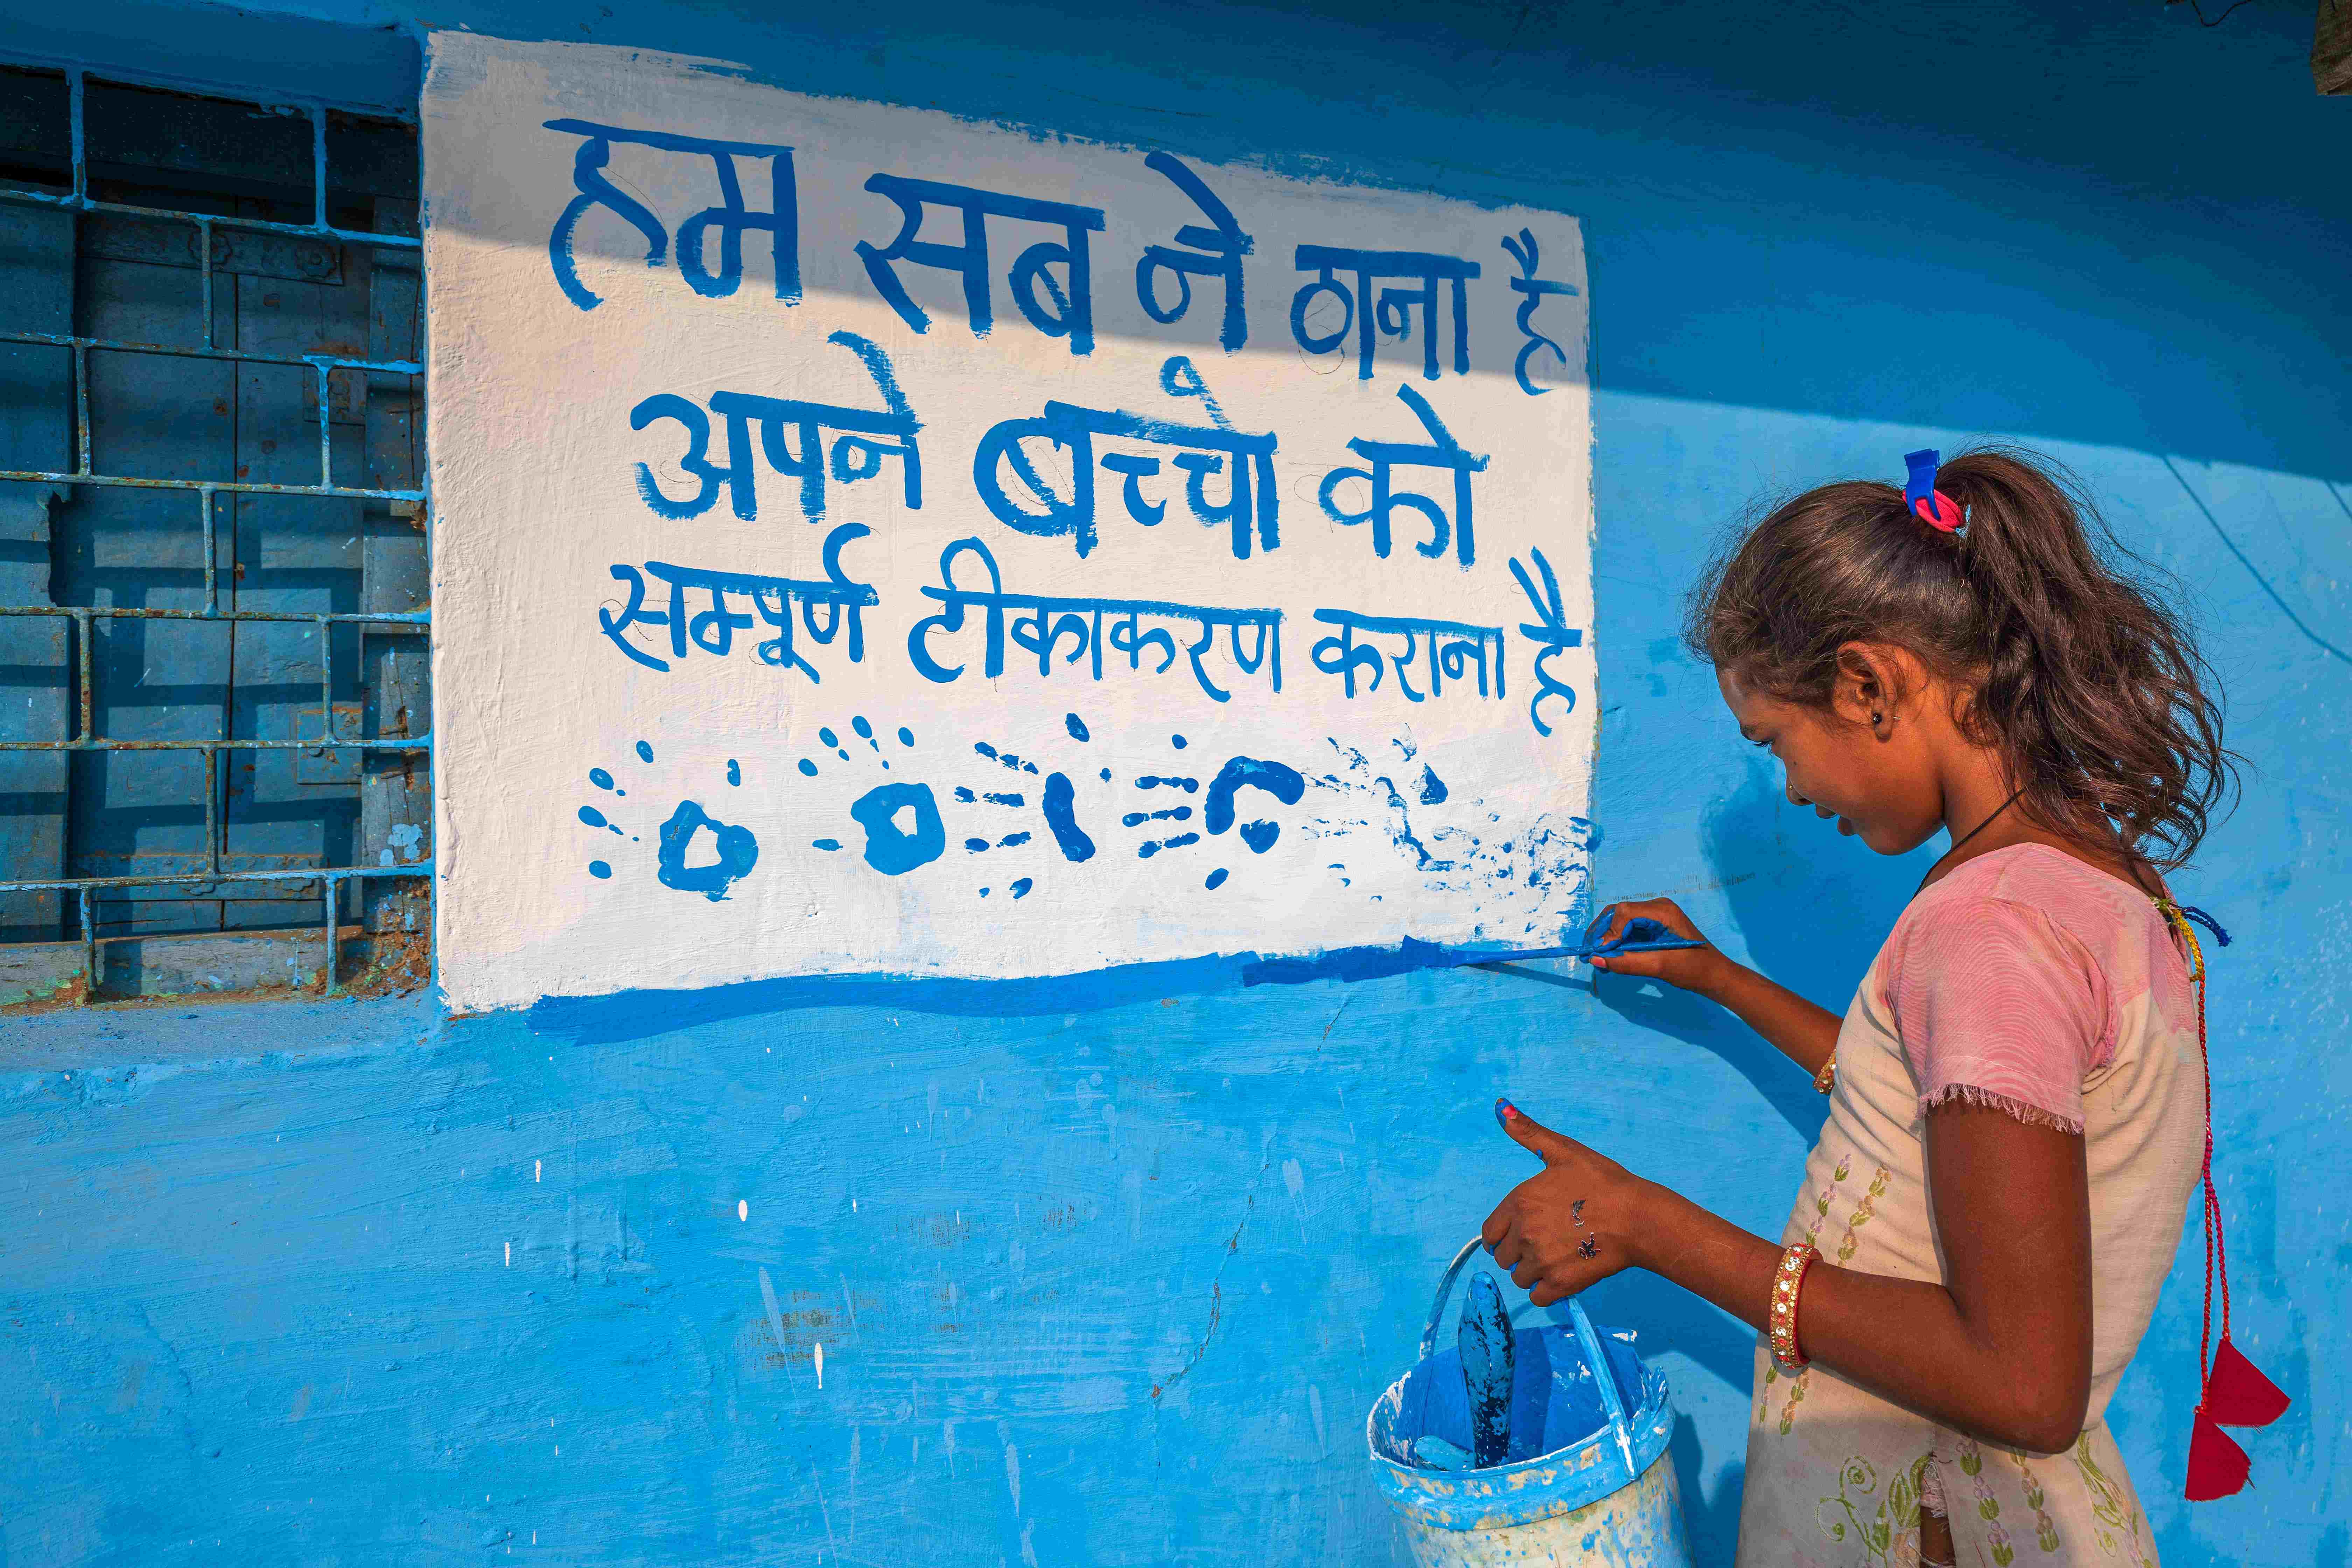 As we GoBlue with Monuments, two small villages in tribal Dhar and Jhabua GoBlue with messages of immunization